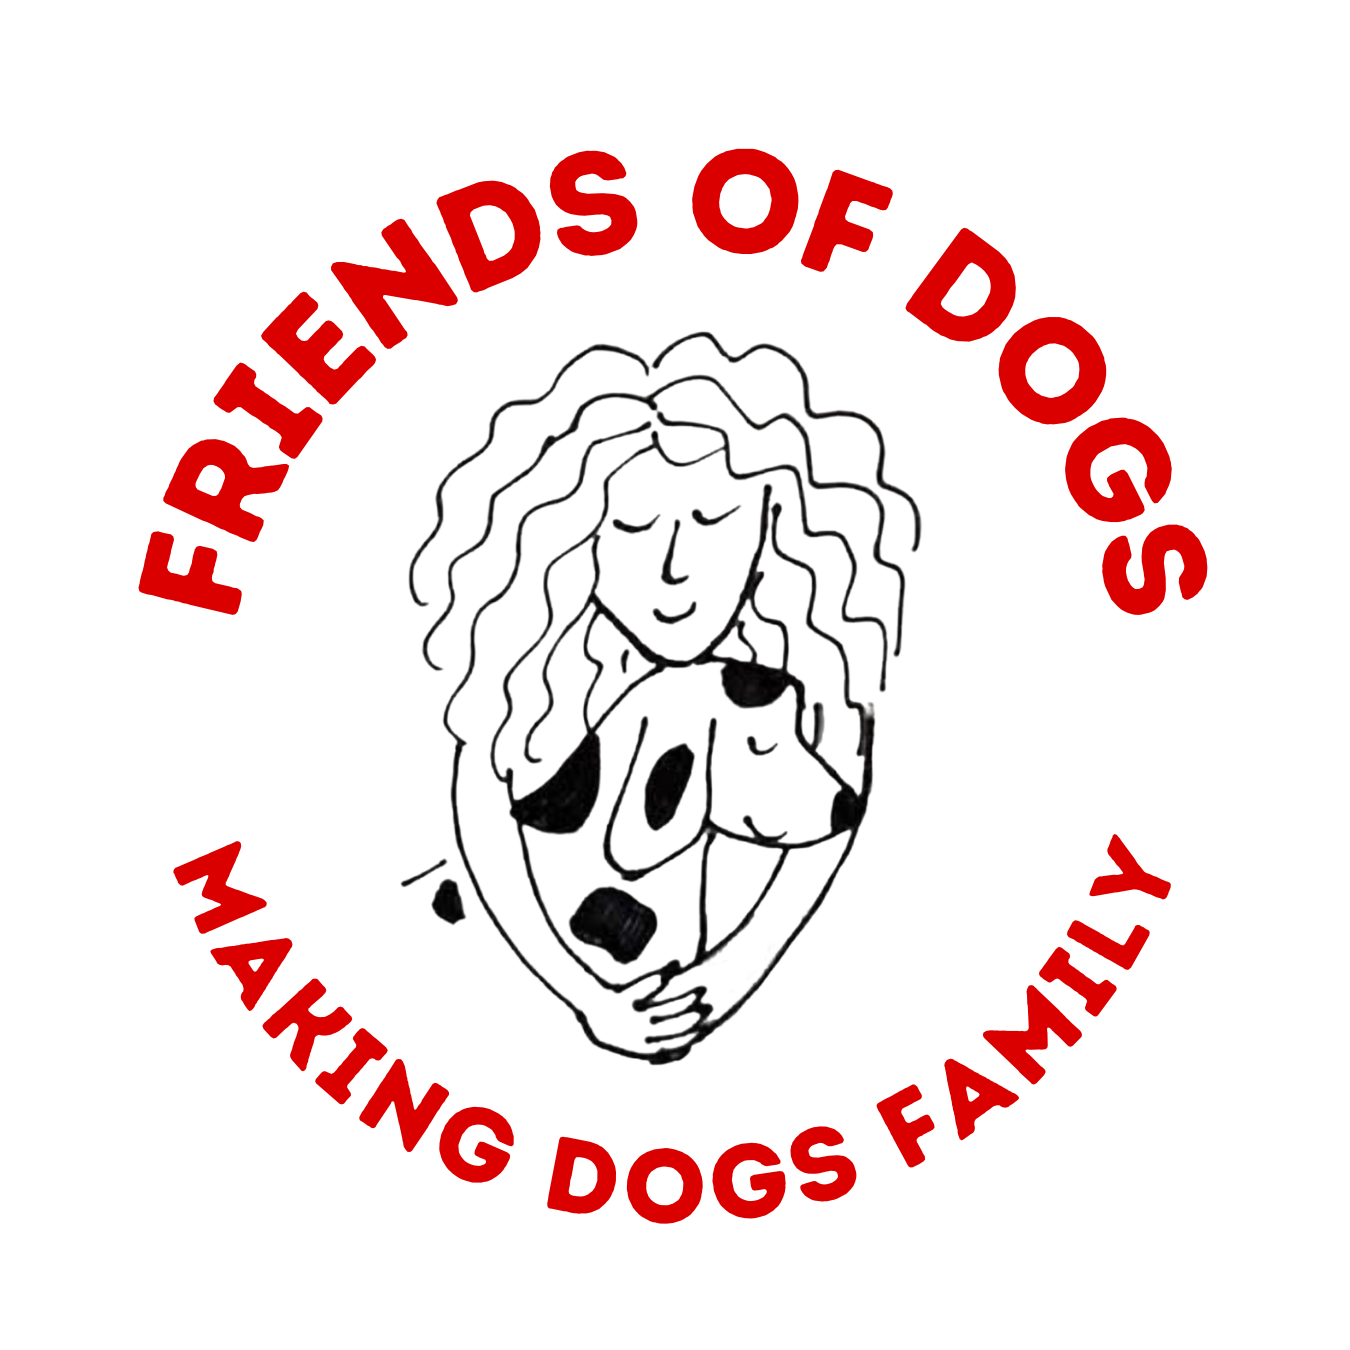 Friends of Dogs Corporation